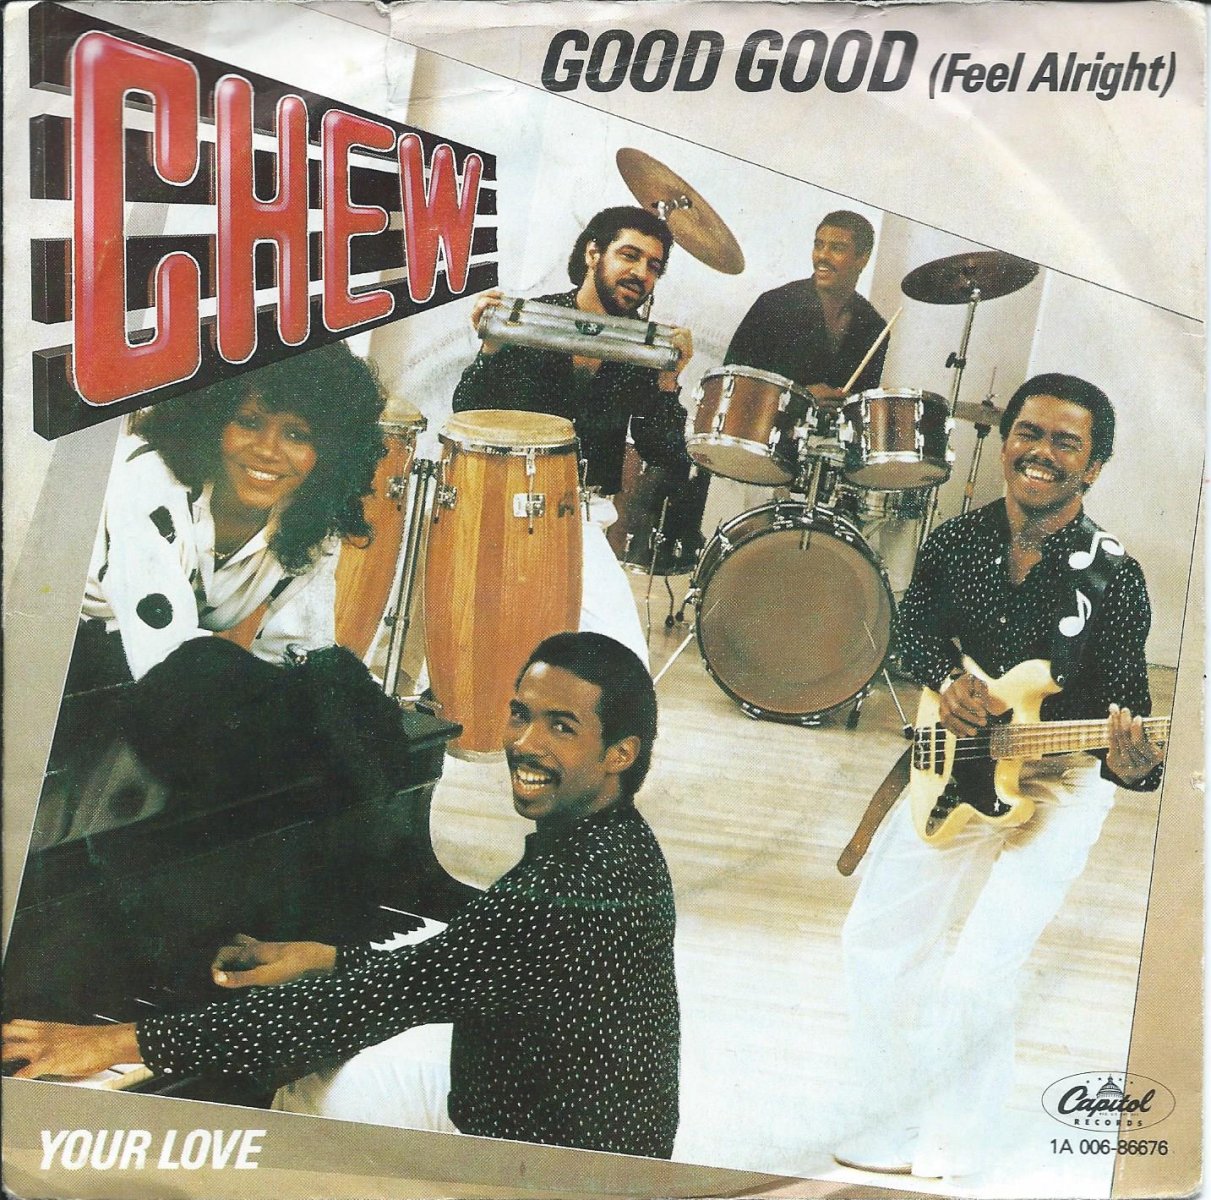 CHEW ‎/ GOOD GOOD (FEEL ALRIGHT) / YOUR LOVE (7